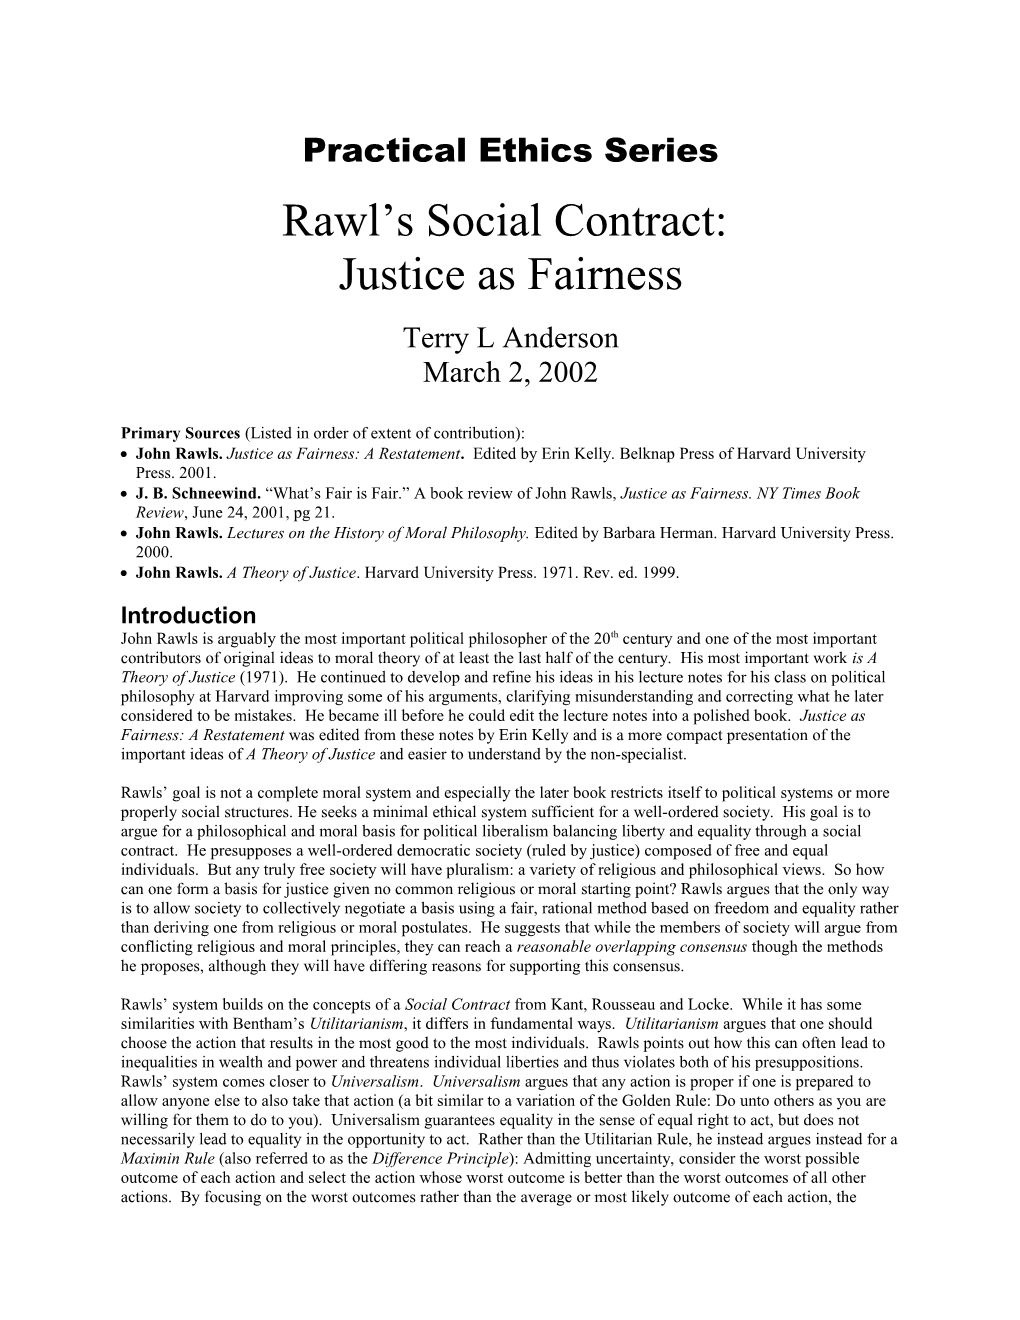 Rawl's Social Contract: Justice As Fairness